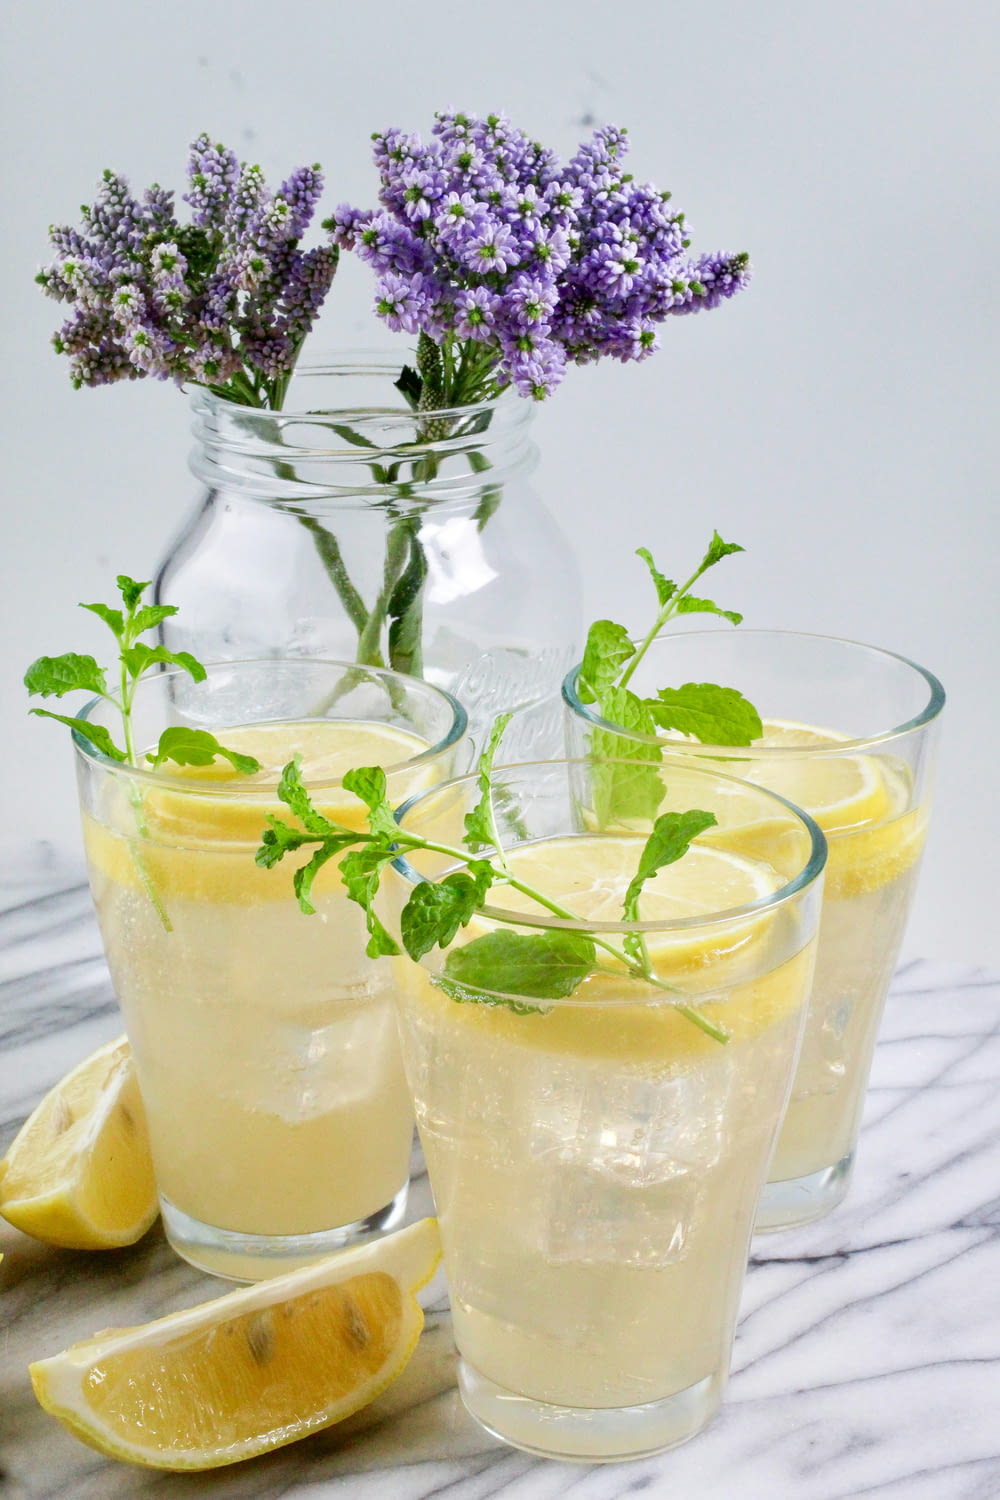 a pitcher of lemonade and two glasses of lemonade